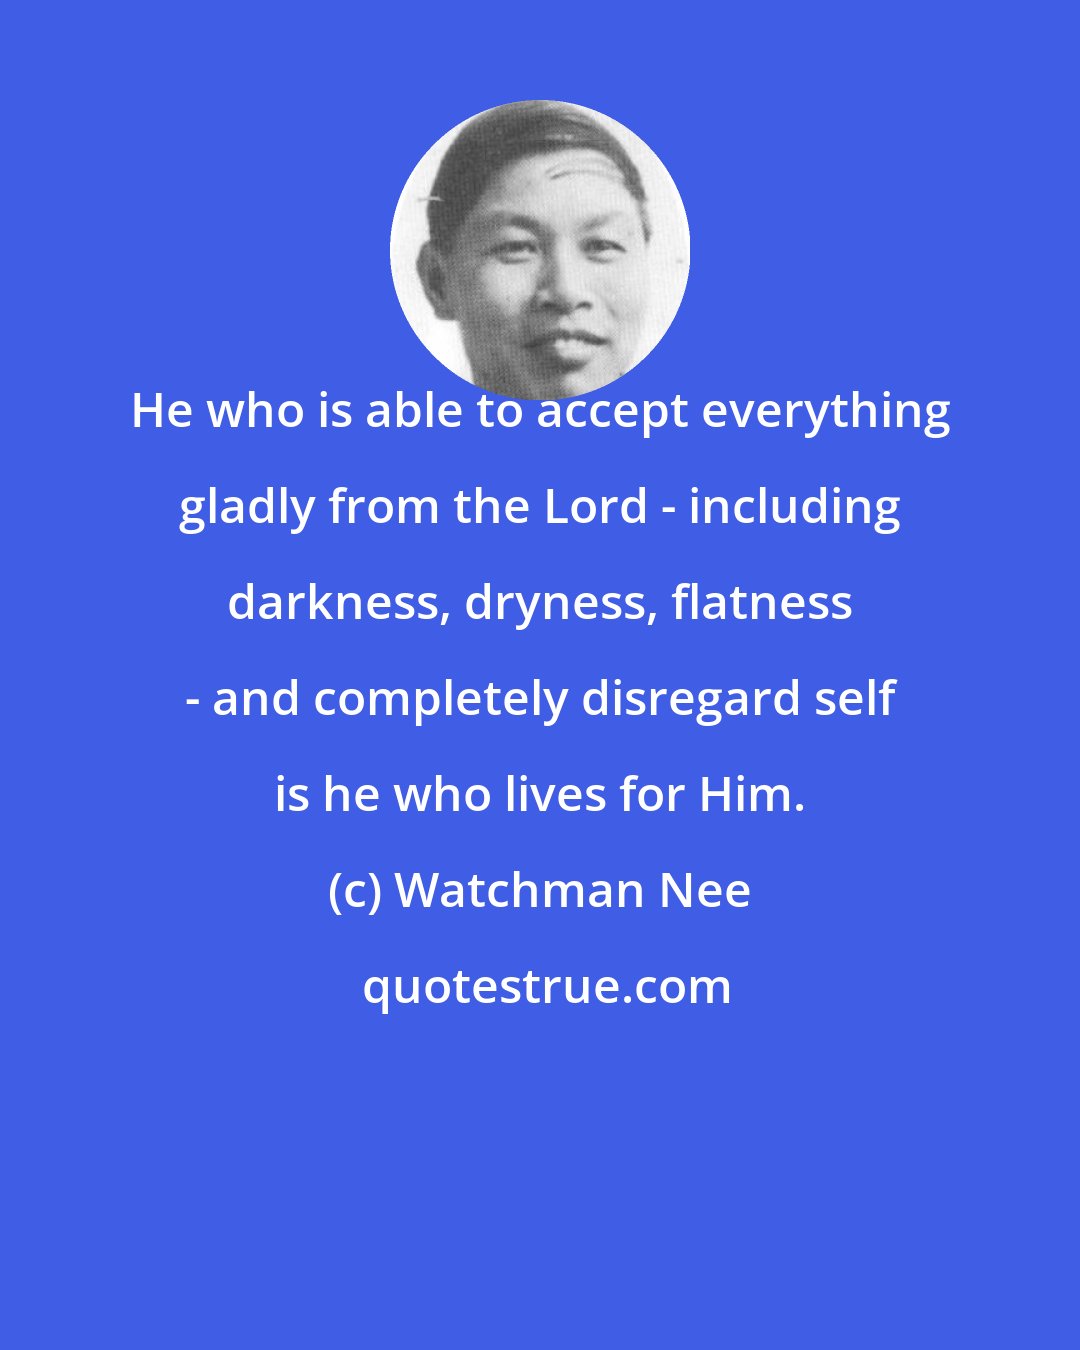 Watchman Nee: He who is able to accept everything gladly from the Lord - including darkness, dryness, flatness - and completely disregard self is he who lives for Him.